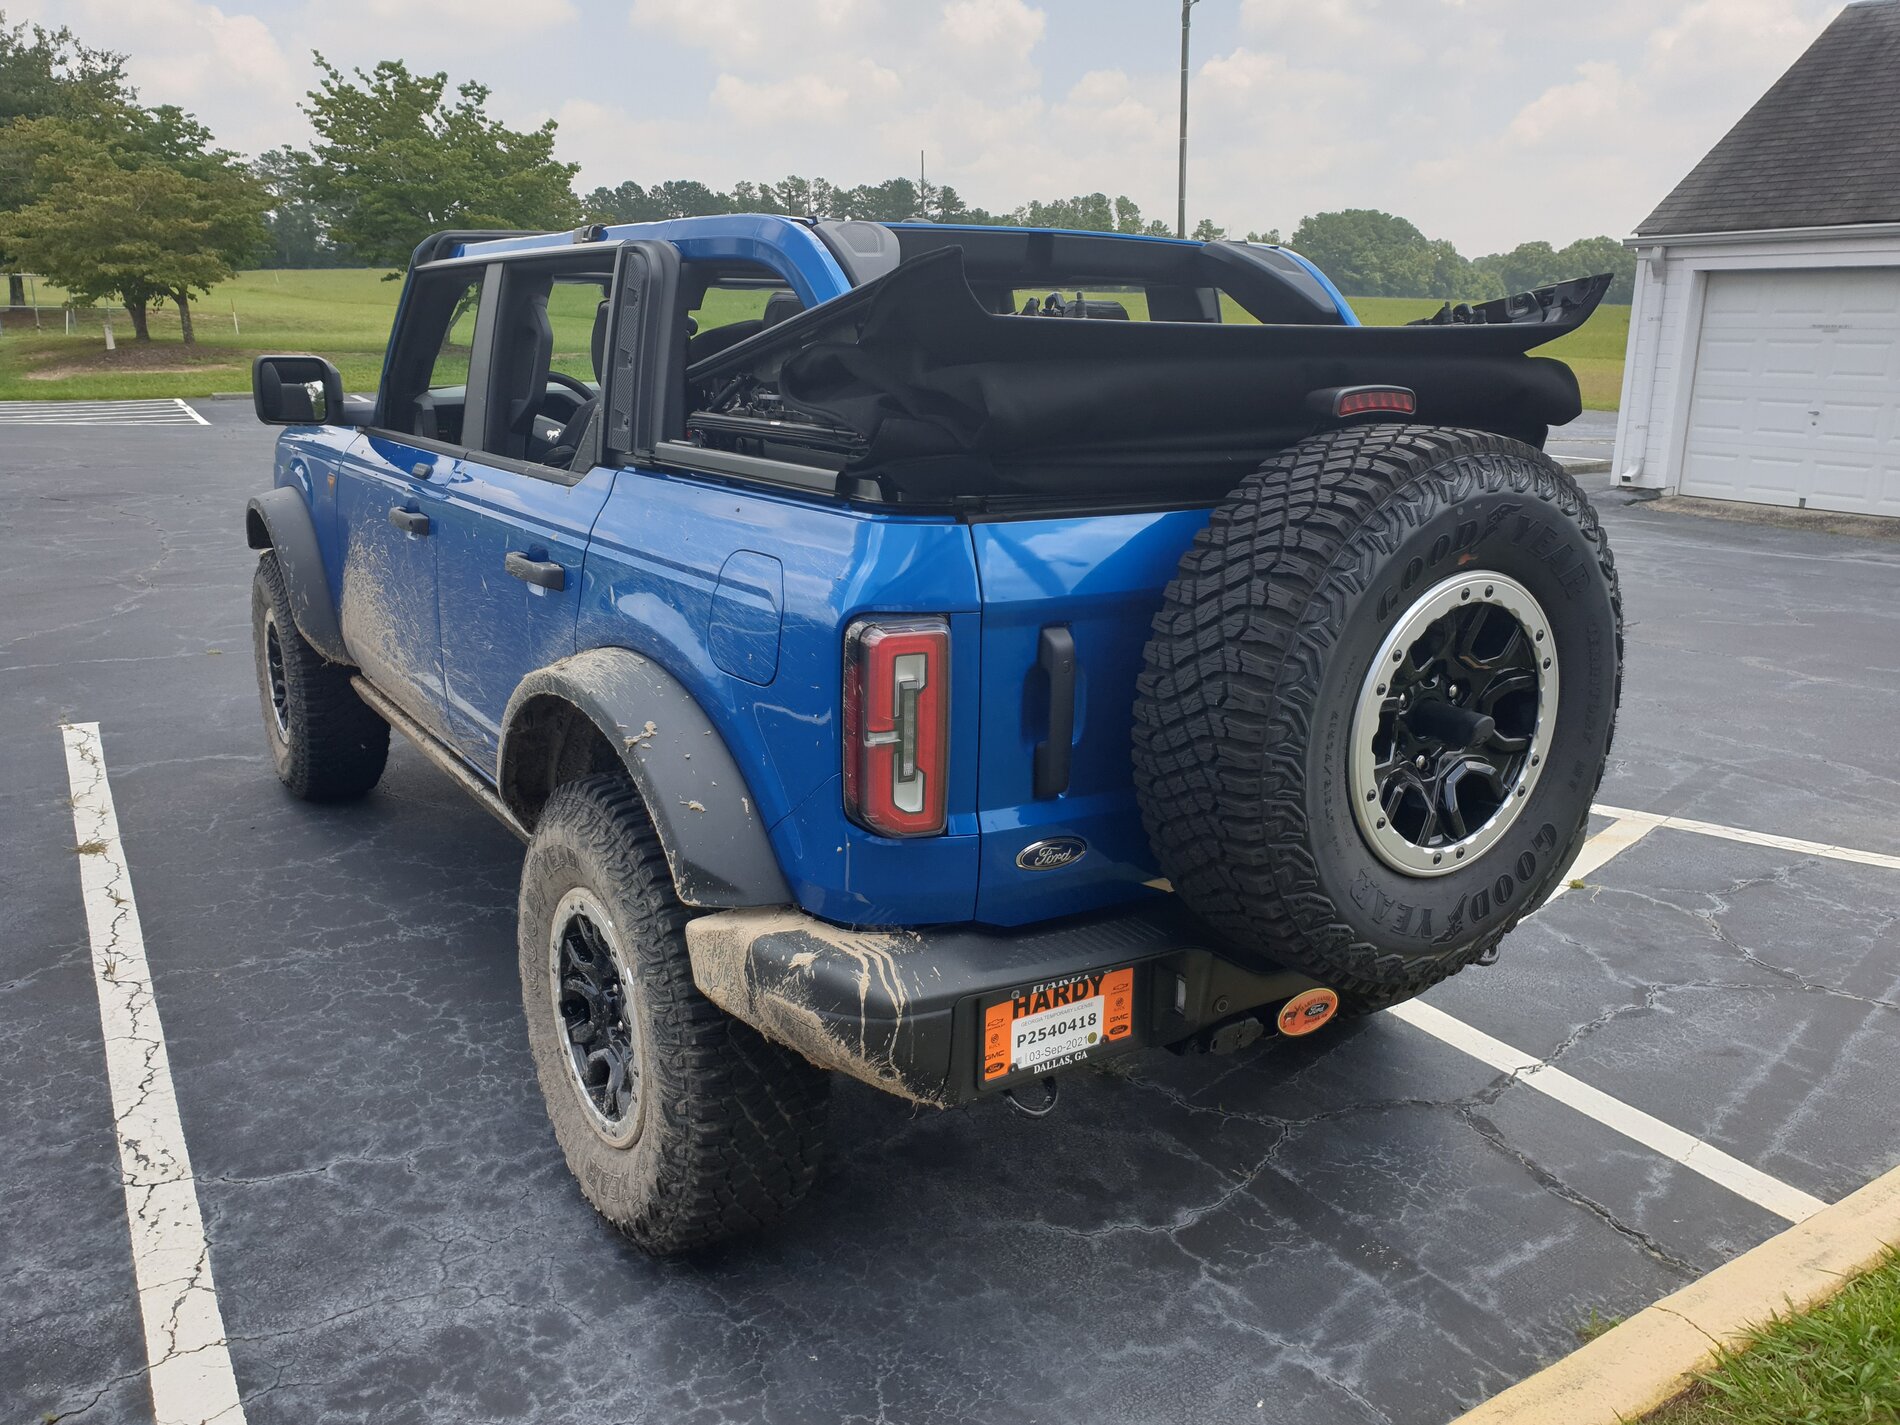 Ford Bronco First 24 hrs in my Badlands Sasquatch 4dr 2.7L Velocity Blue Soft Top (w/ Rear Cargo Enclosure review) 20210722_134724